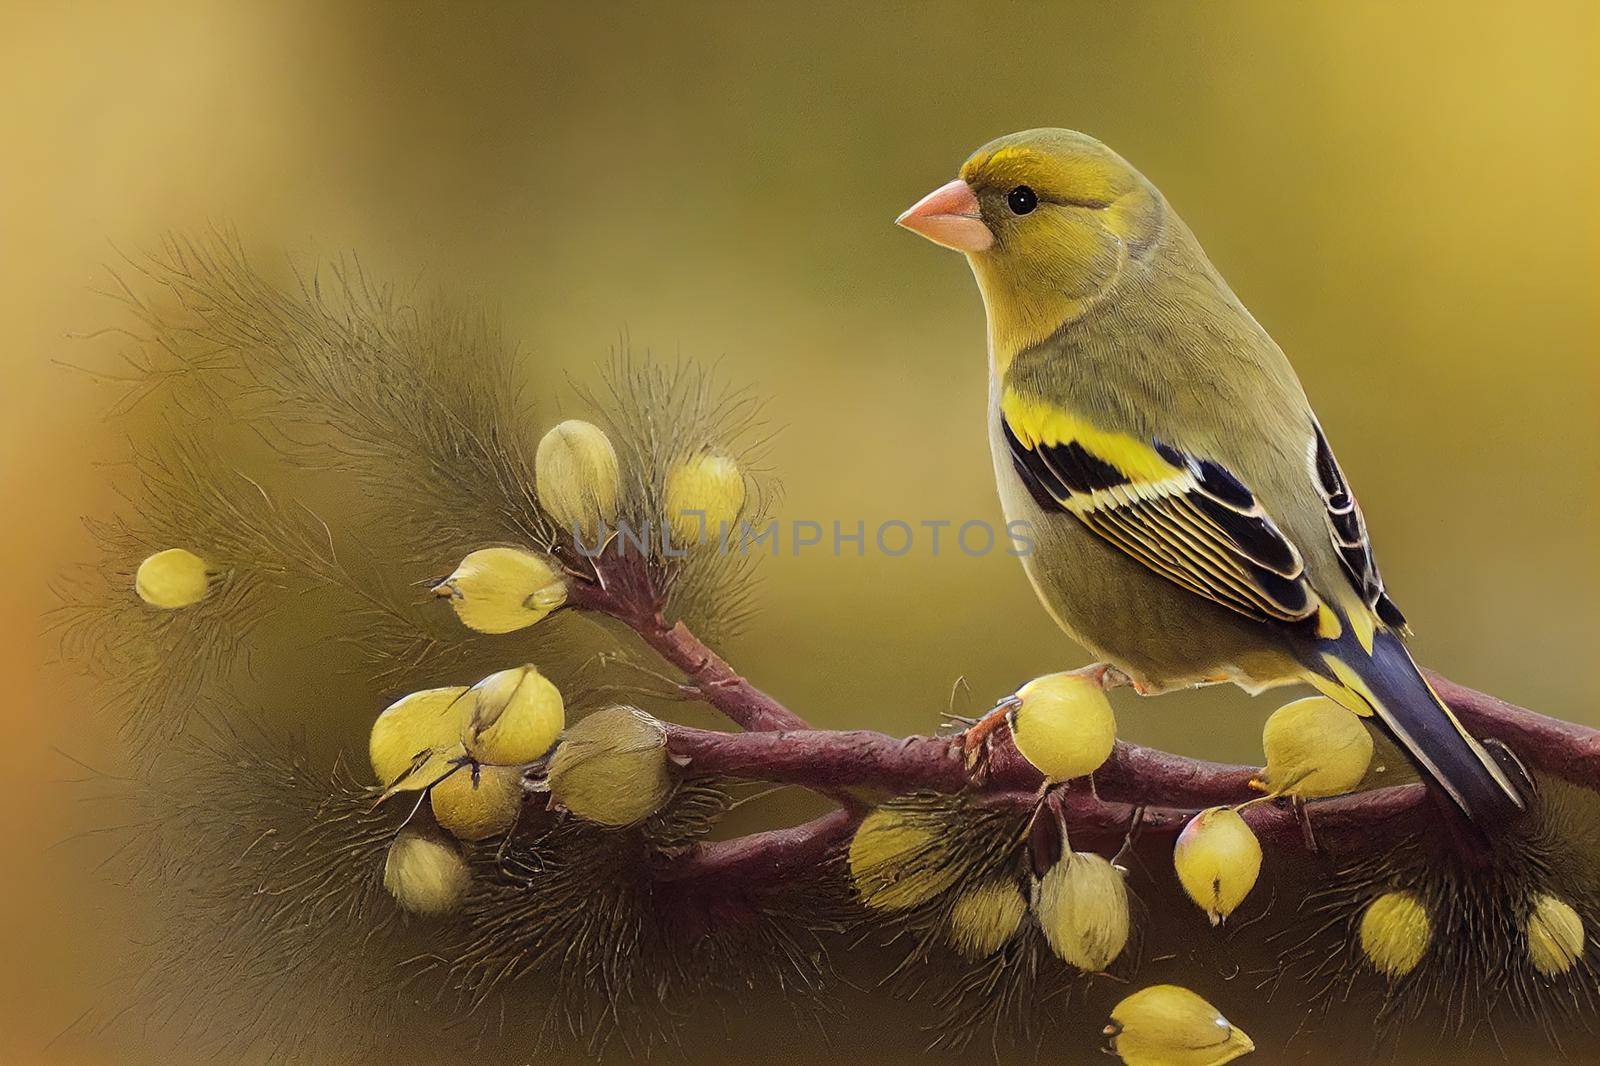 European greenfinch Chloris chloris. Small bird with fresh yellow color body. Song bird sitting on woody root. Diffused brown background. Garden bird in winter time on feeder. European wildlife.. High quality illustration